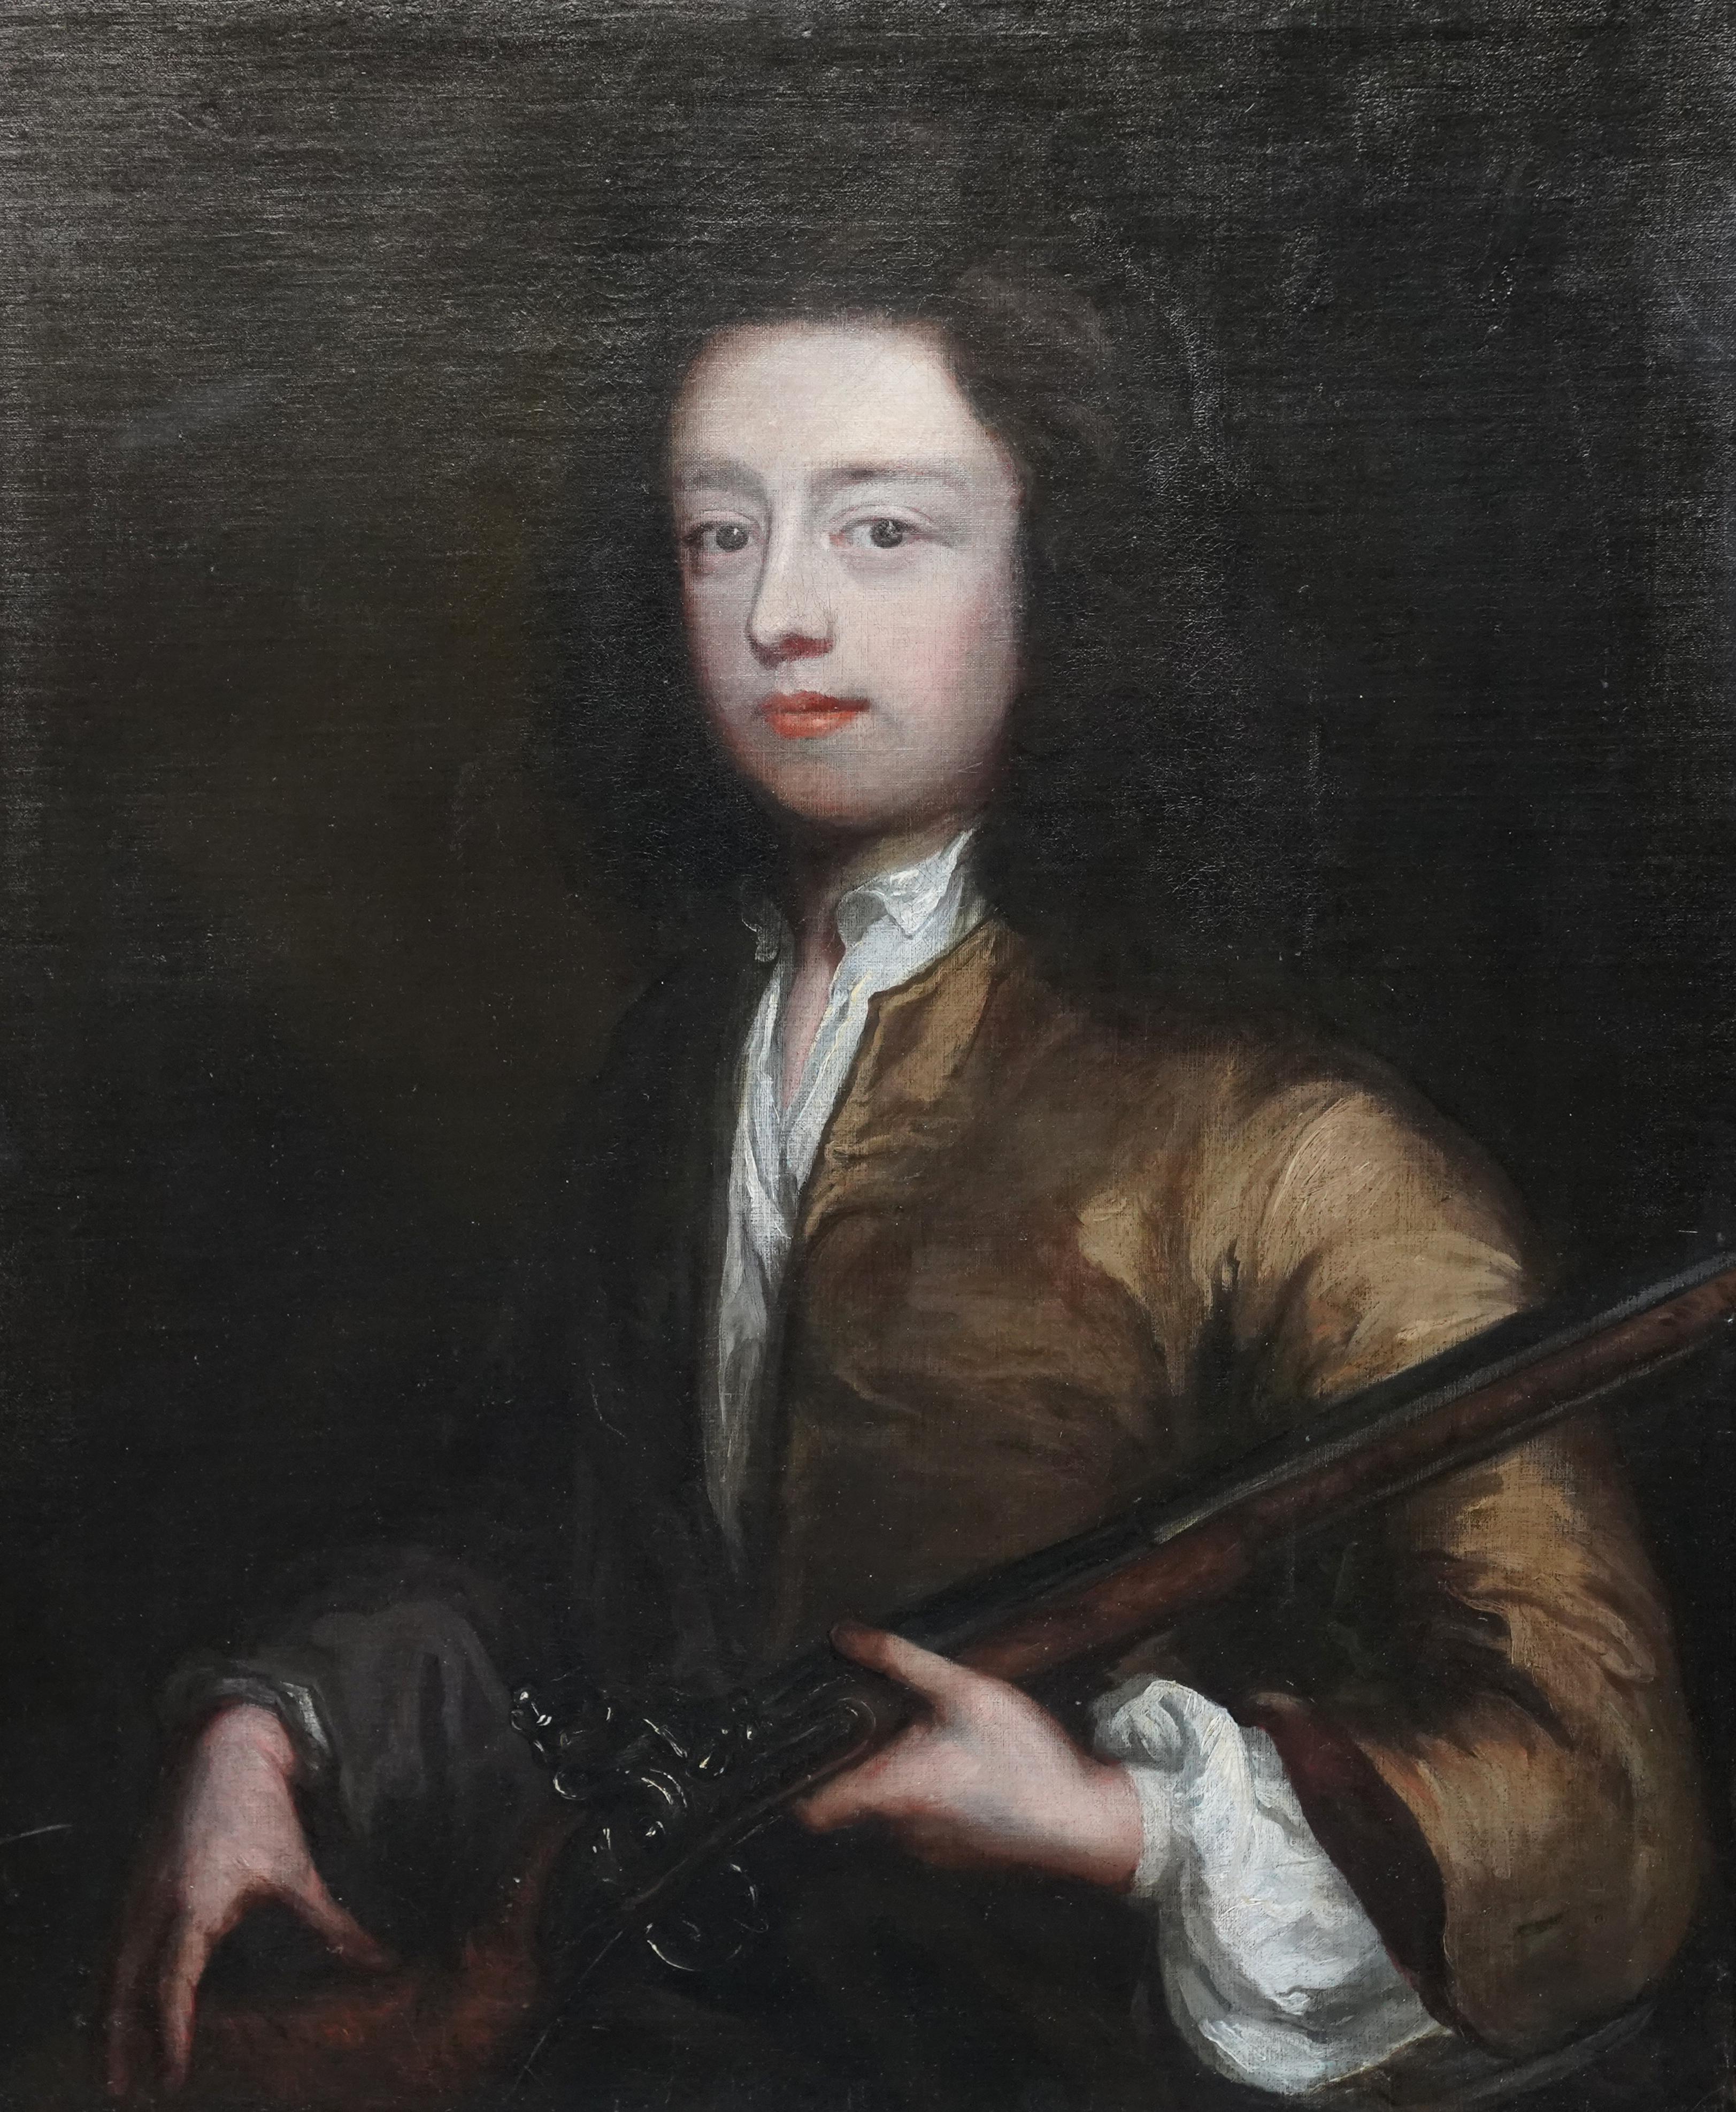 Old Master Portrait of a Gentleman - British 18th century oil painting For Sale 6